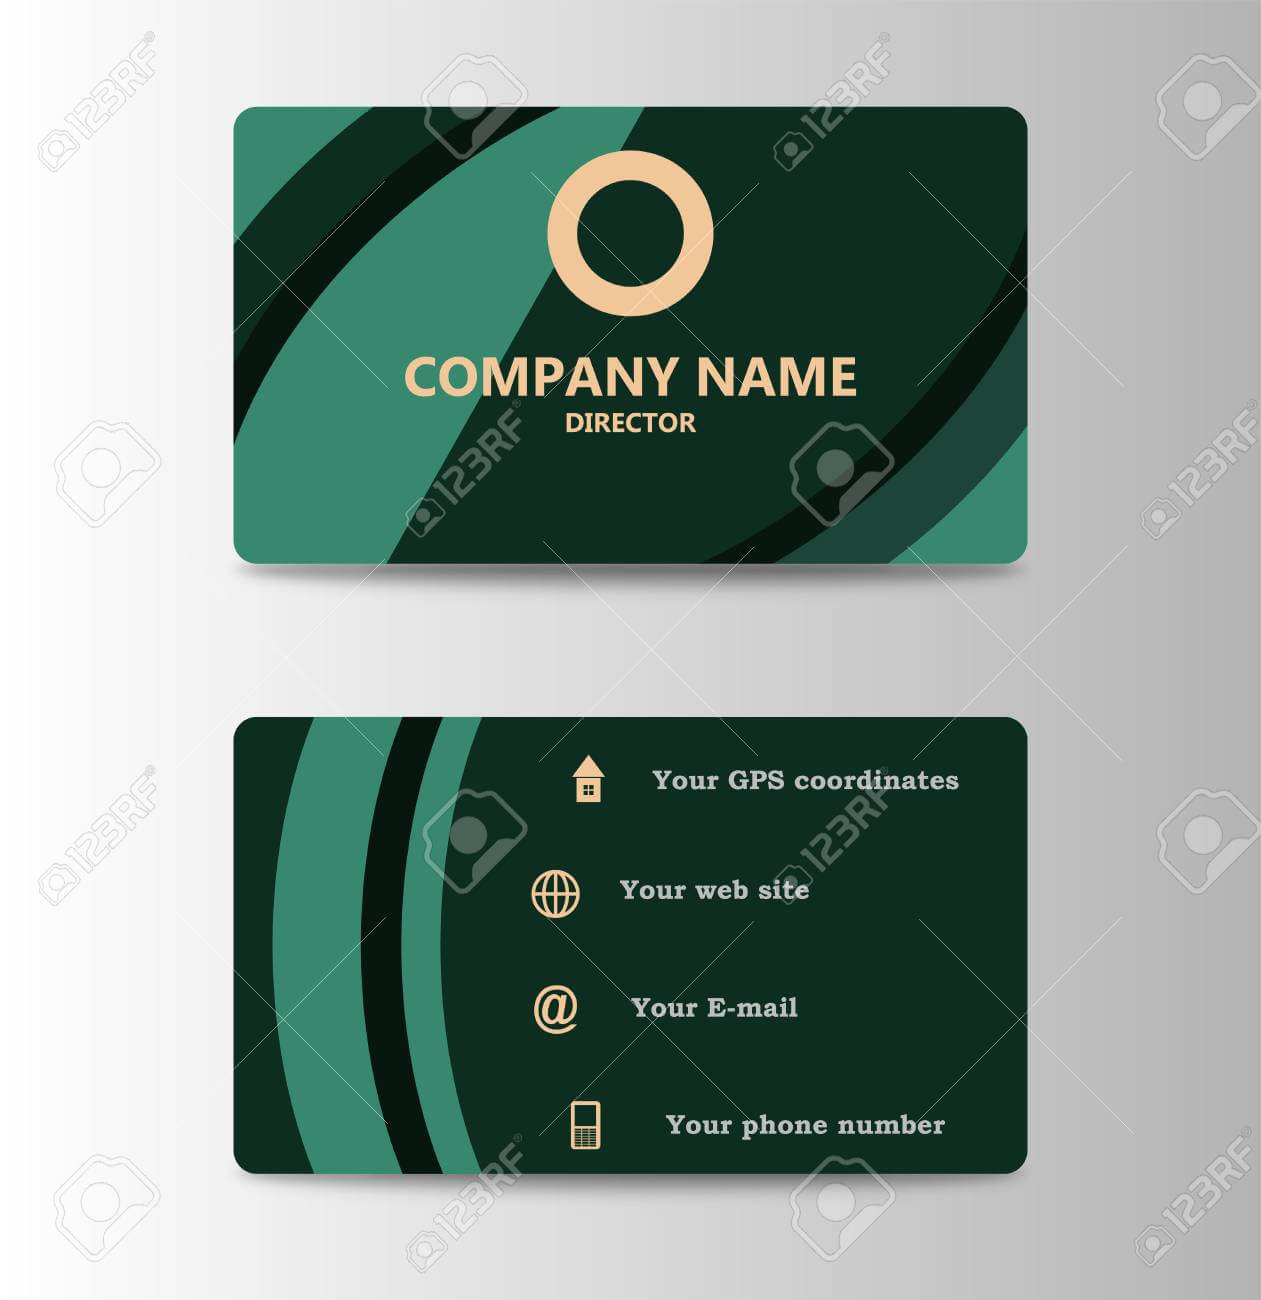 Corporate Id Card Design Template. Personal Id Card For Business.. Intended For Personal Identification Card Template